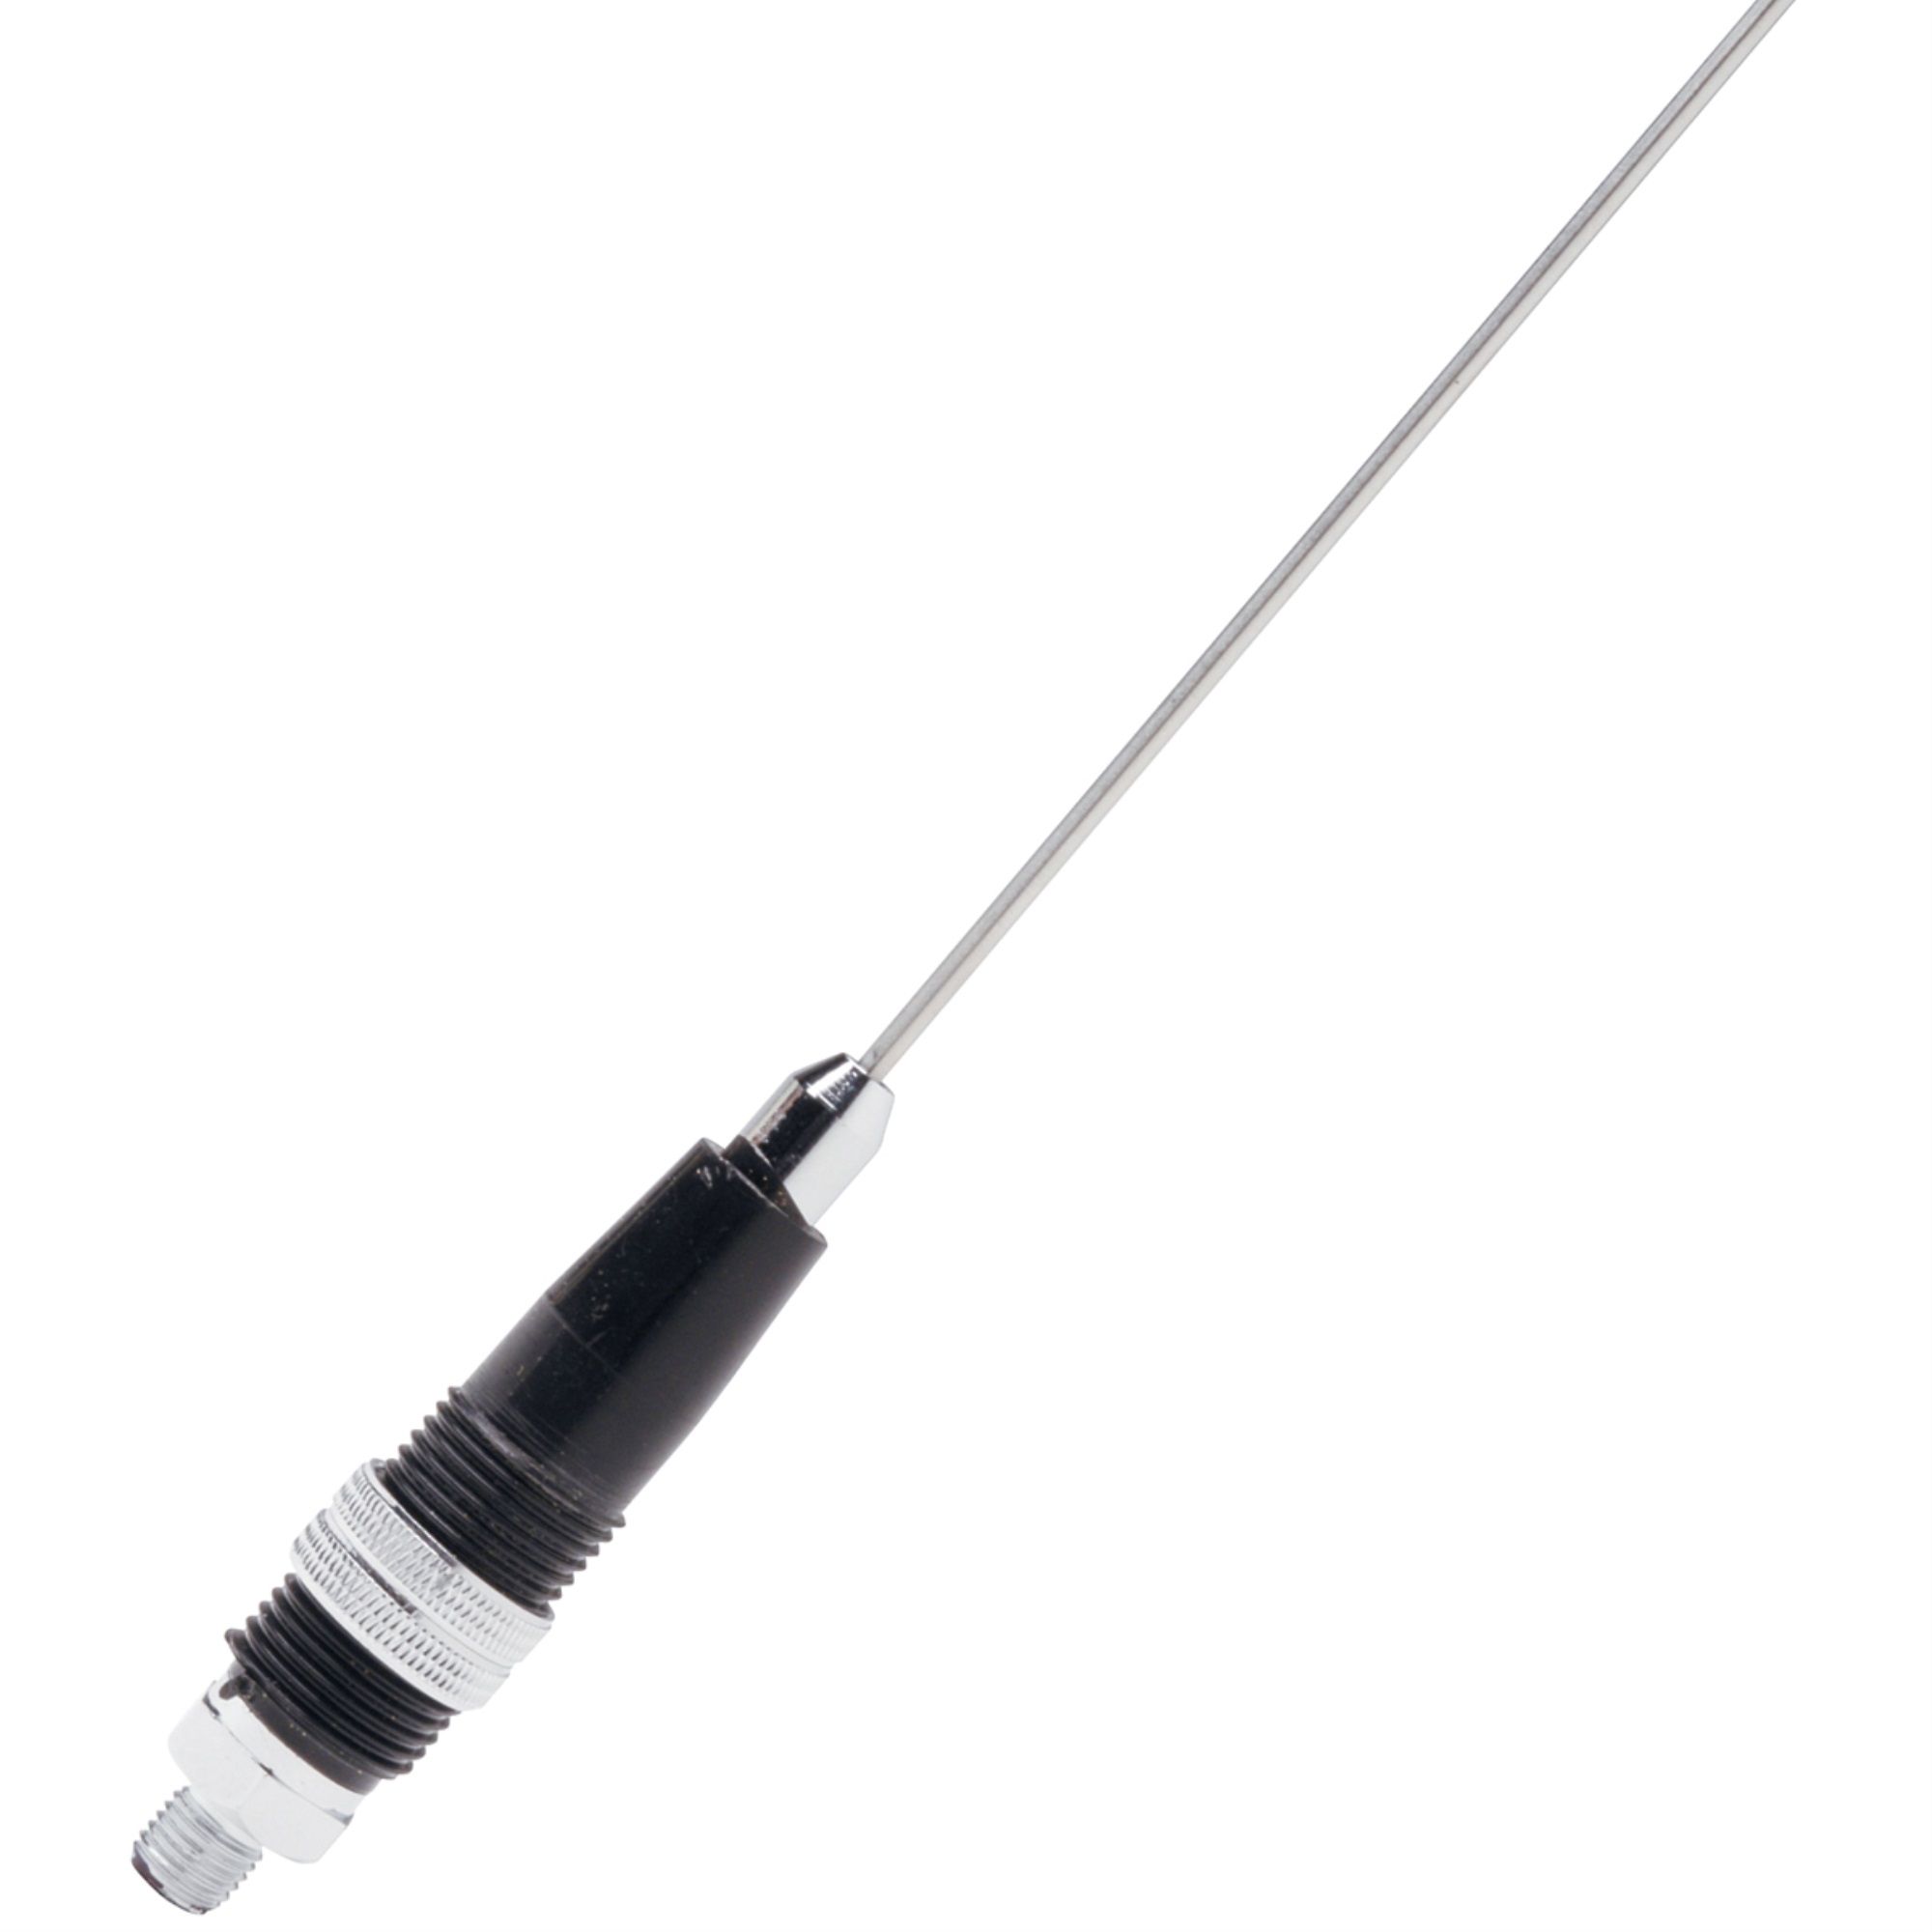 Solarcon A-111 3-Foot Stainless Steel 50W Tunable CB Antenna Whip 3FT CB Radio Antenna Black